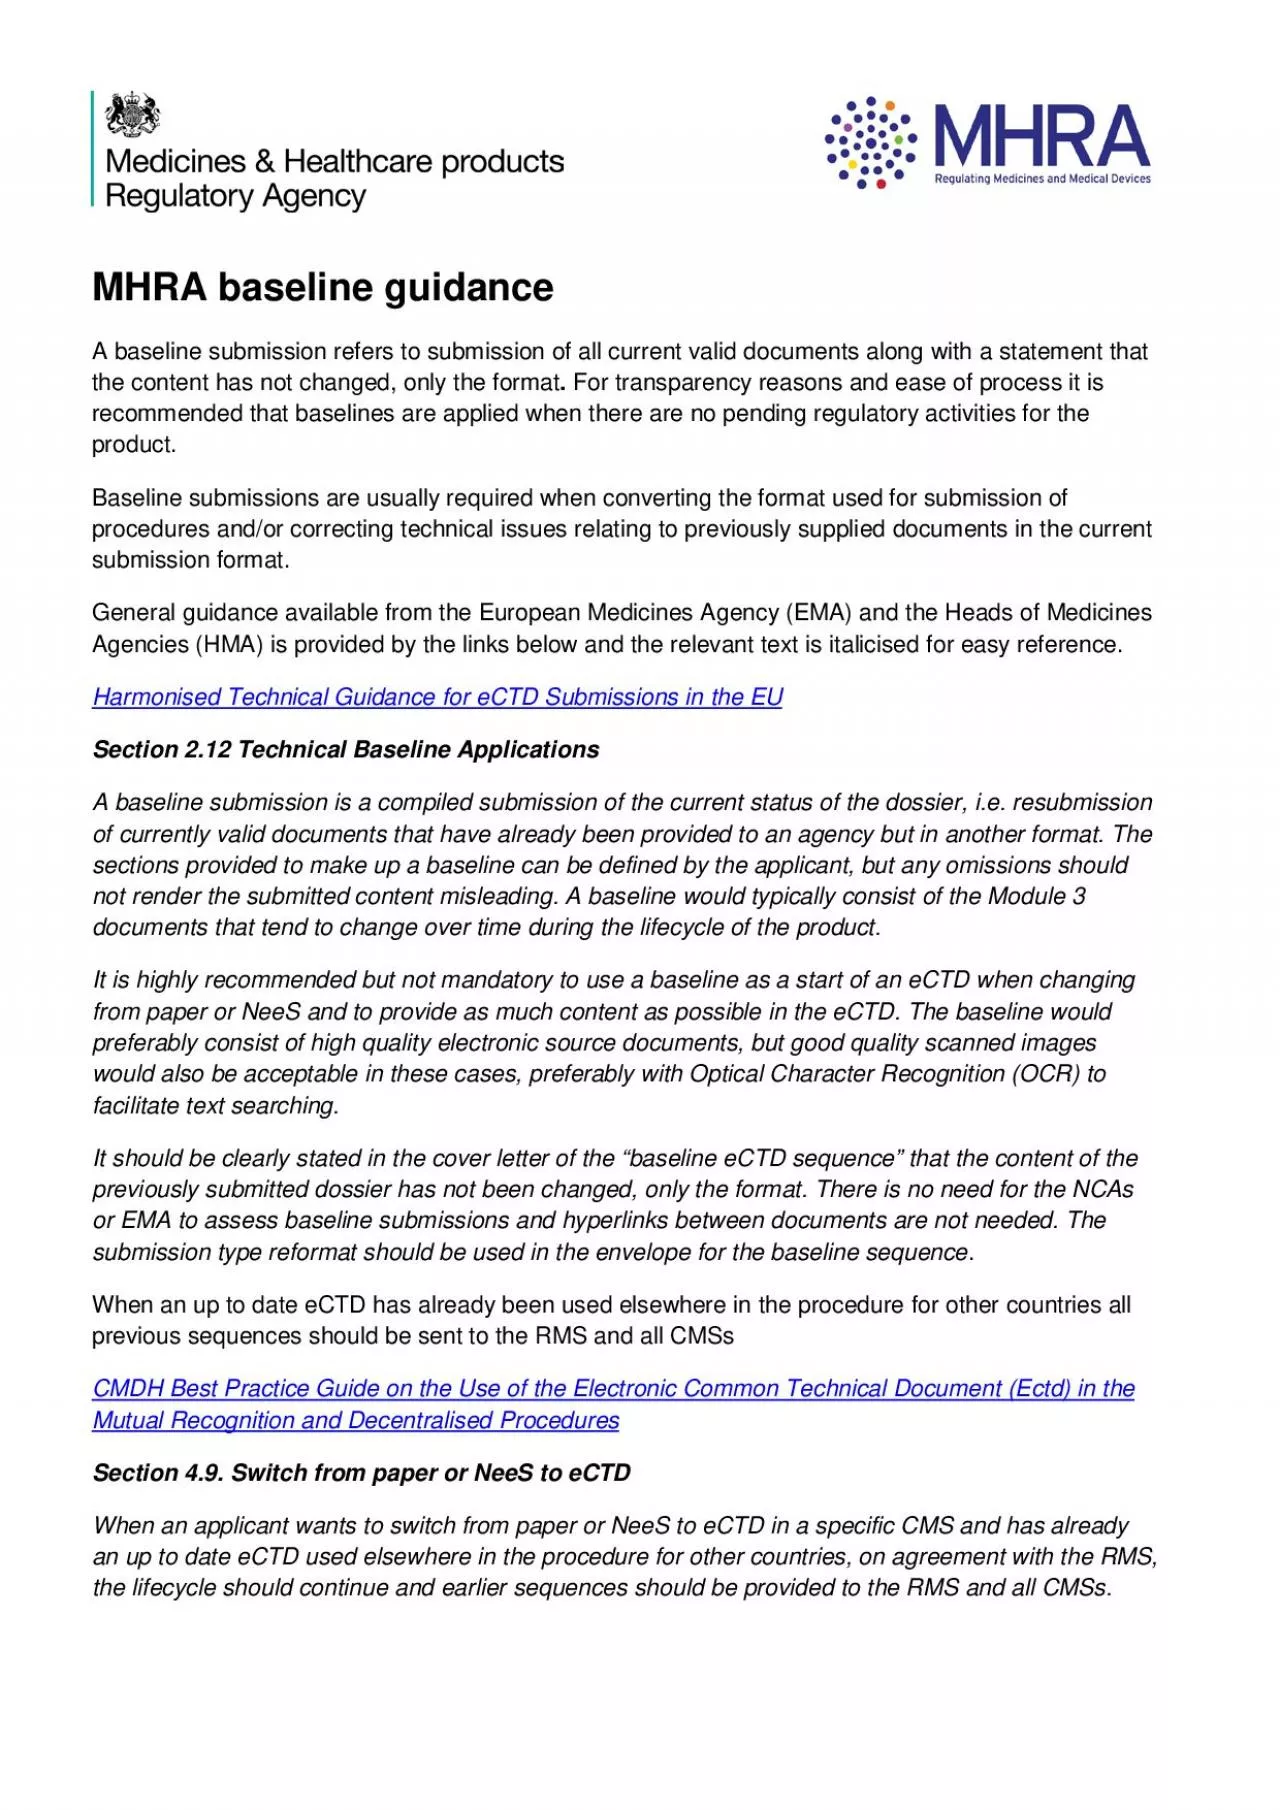 MHRA baseline guidanceA baseline submission refers to submission of al